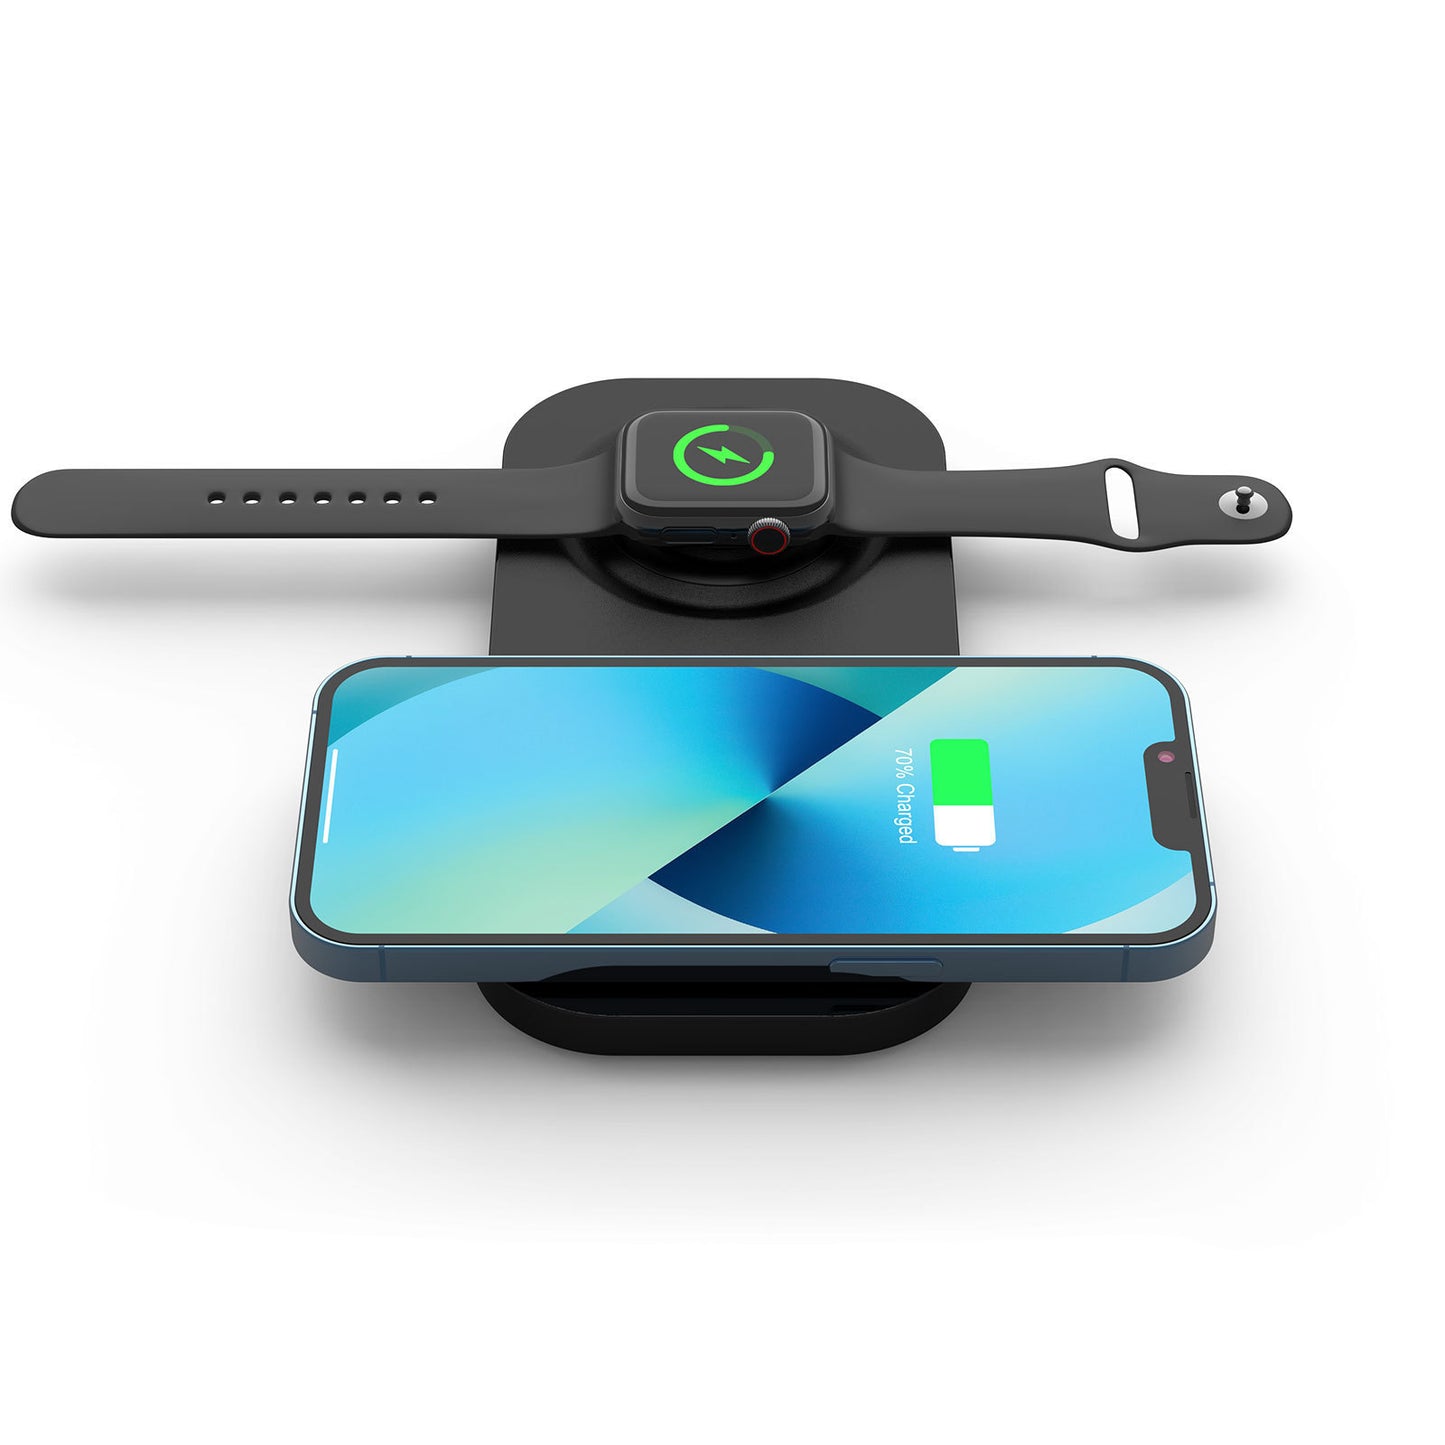 2-in-1 charging station 15W fast wireless charging Pad